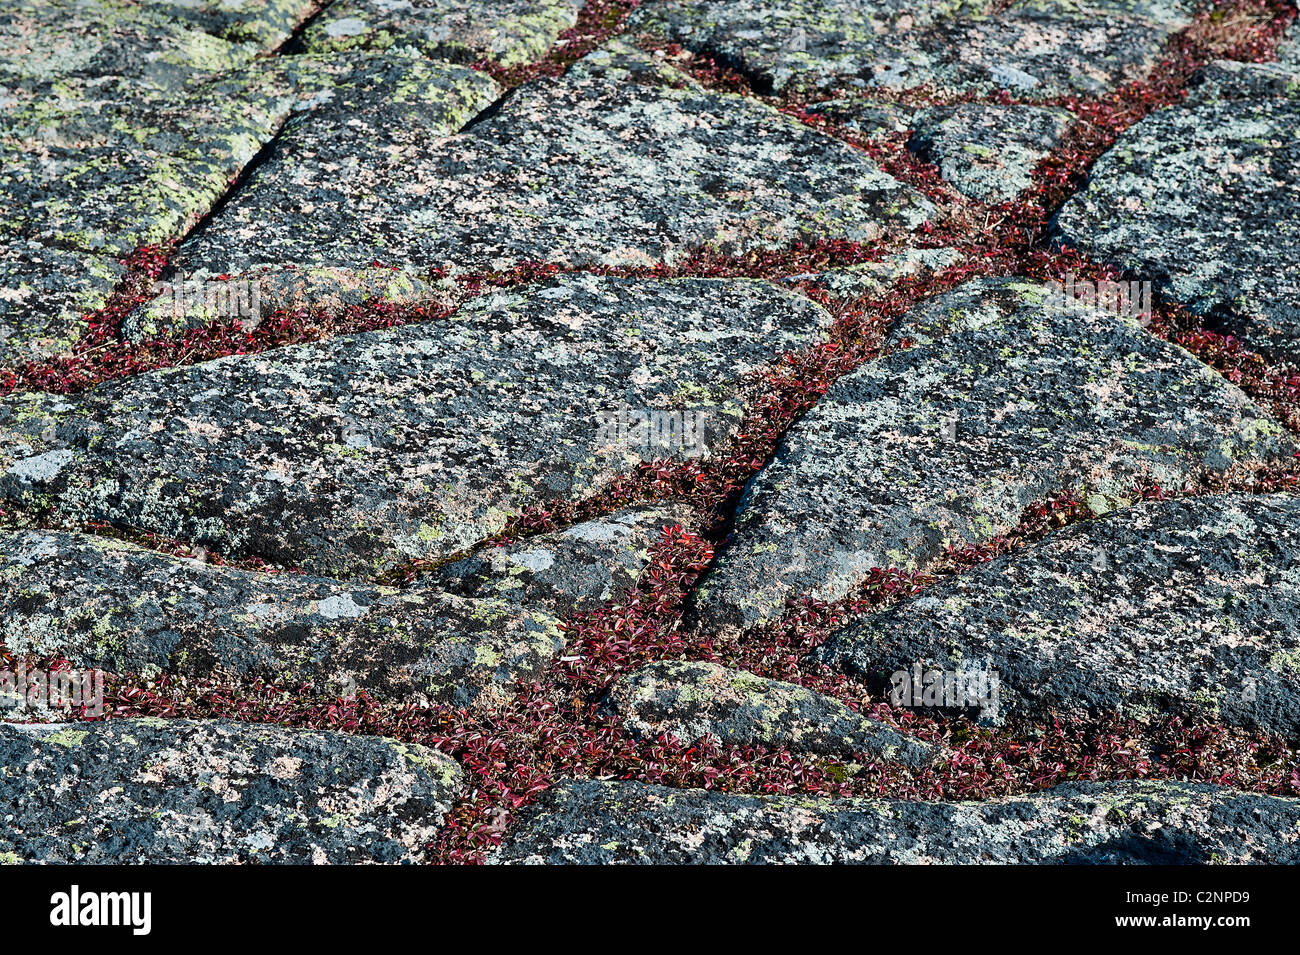 Ground cover and granite, Cadillac Mountain, Maine, USA Stock Photo